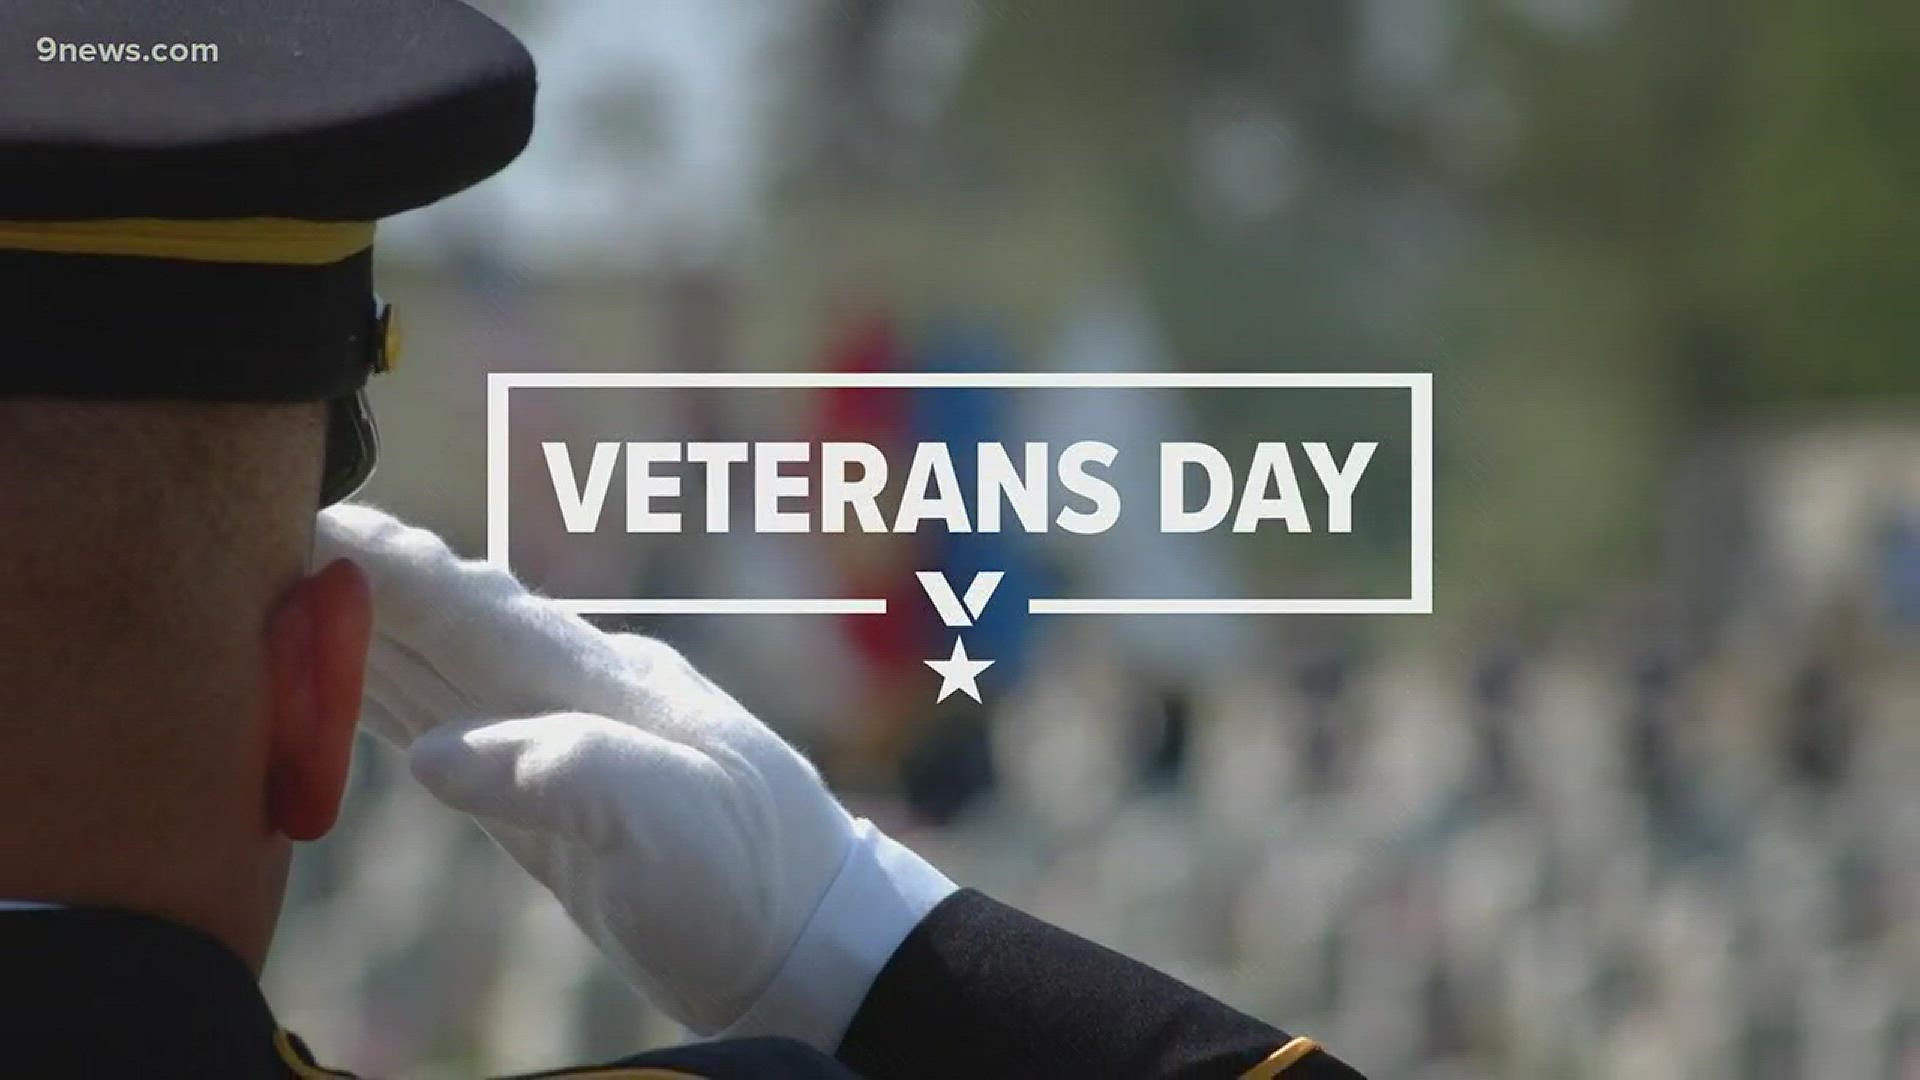 Yesterday was 11/11 - Veteran's Day. For many people it's simply a day off from work.
It is, more importantly, a good day to think a more deeply about our Veterans. There are nearly 60,000 post-9/11 vets living in Colorado alone, many of whom may be strug